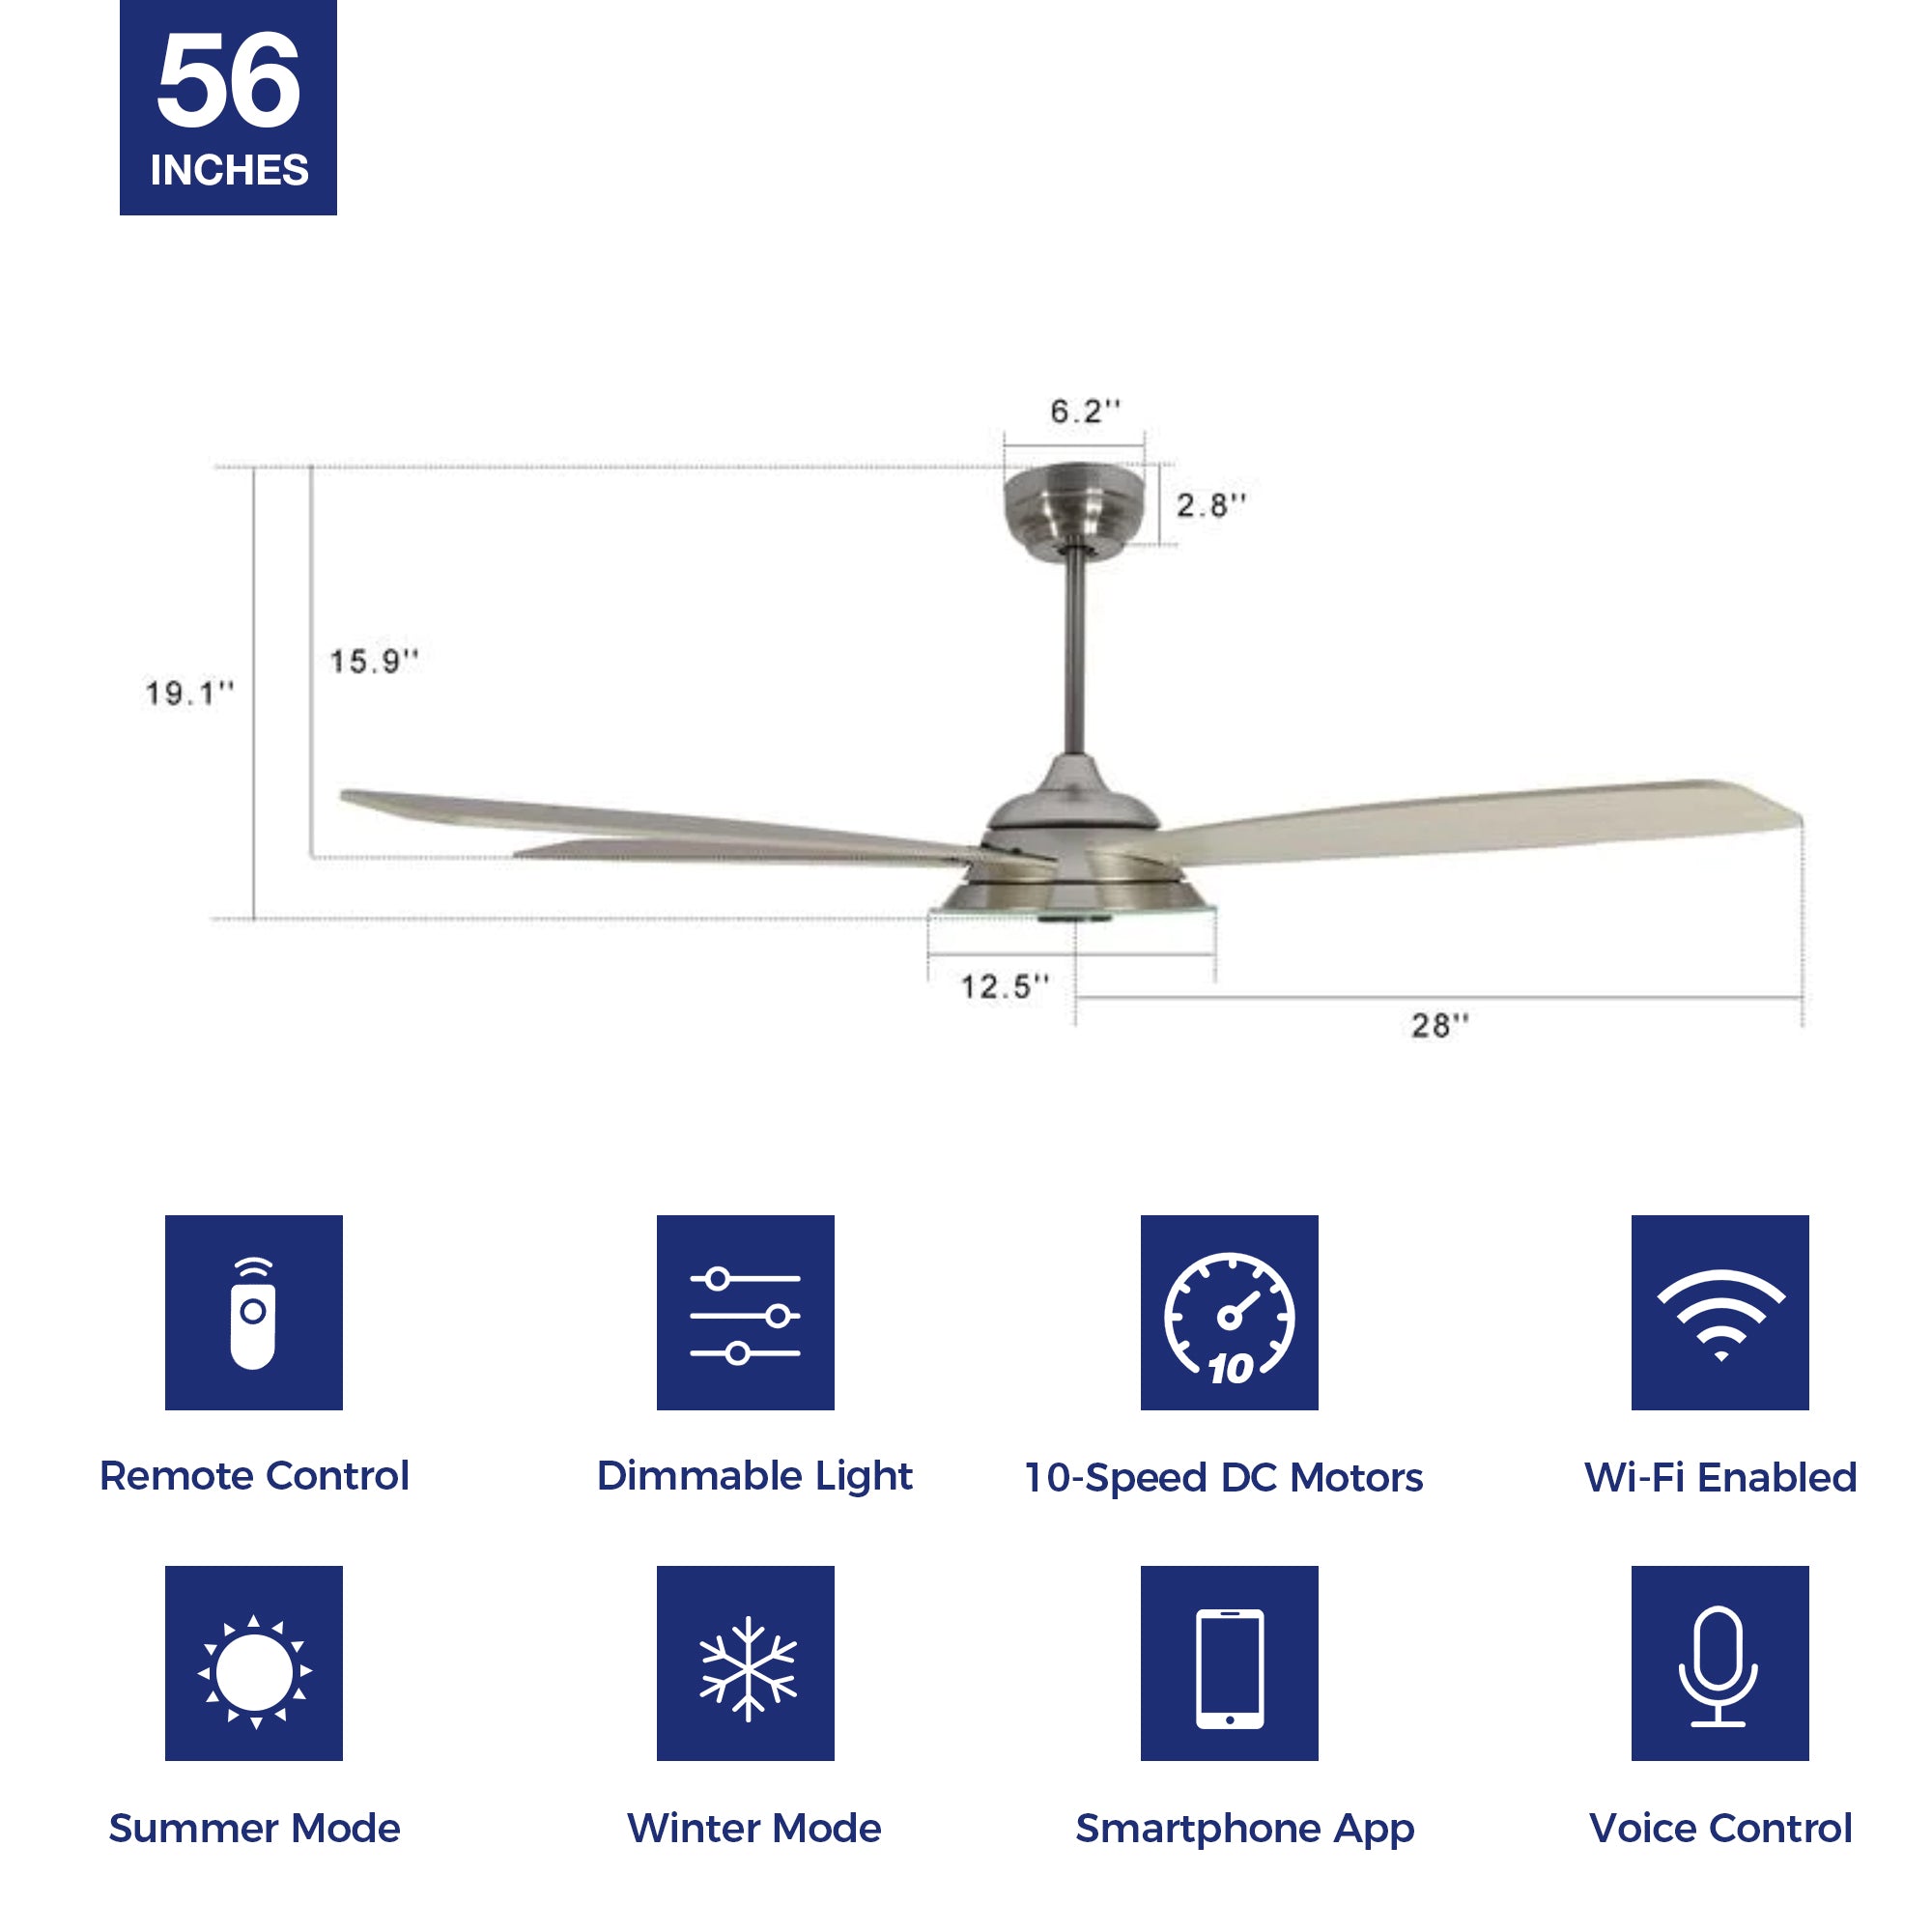 Striker Outdoor 56&quot; Smart Ceiling Fan with LED Light Kit-Silver Case and light-color Wood Grain Fan Blades. The fan features Remote control, Wi-Fi apps, and Voice control technology (compatible with Amazon Alexa and Google Home Assistant ) to set fan preferences. Equipped with 3576-lumen dimmable LED lights and a 10-speed DC Motor (5600CFM airflow output), it brings you cool and bright. 